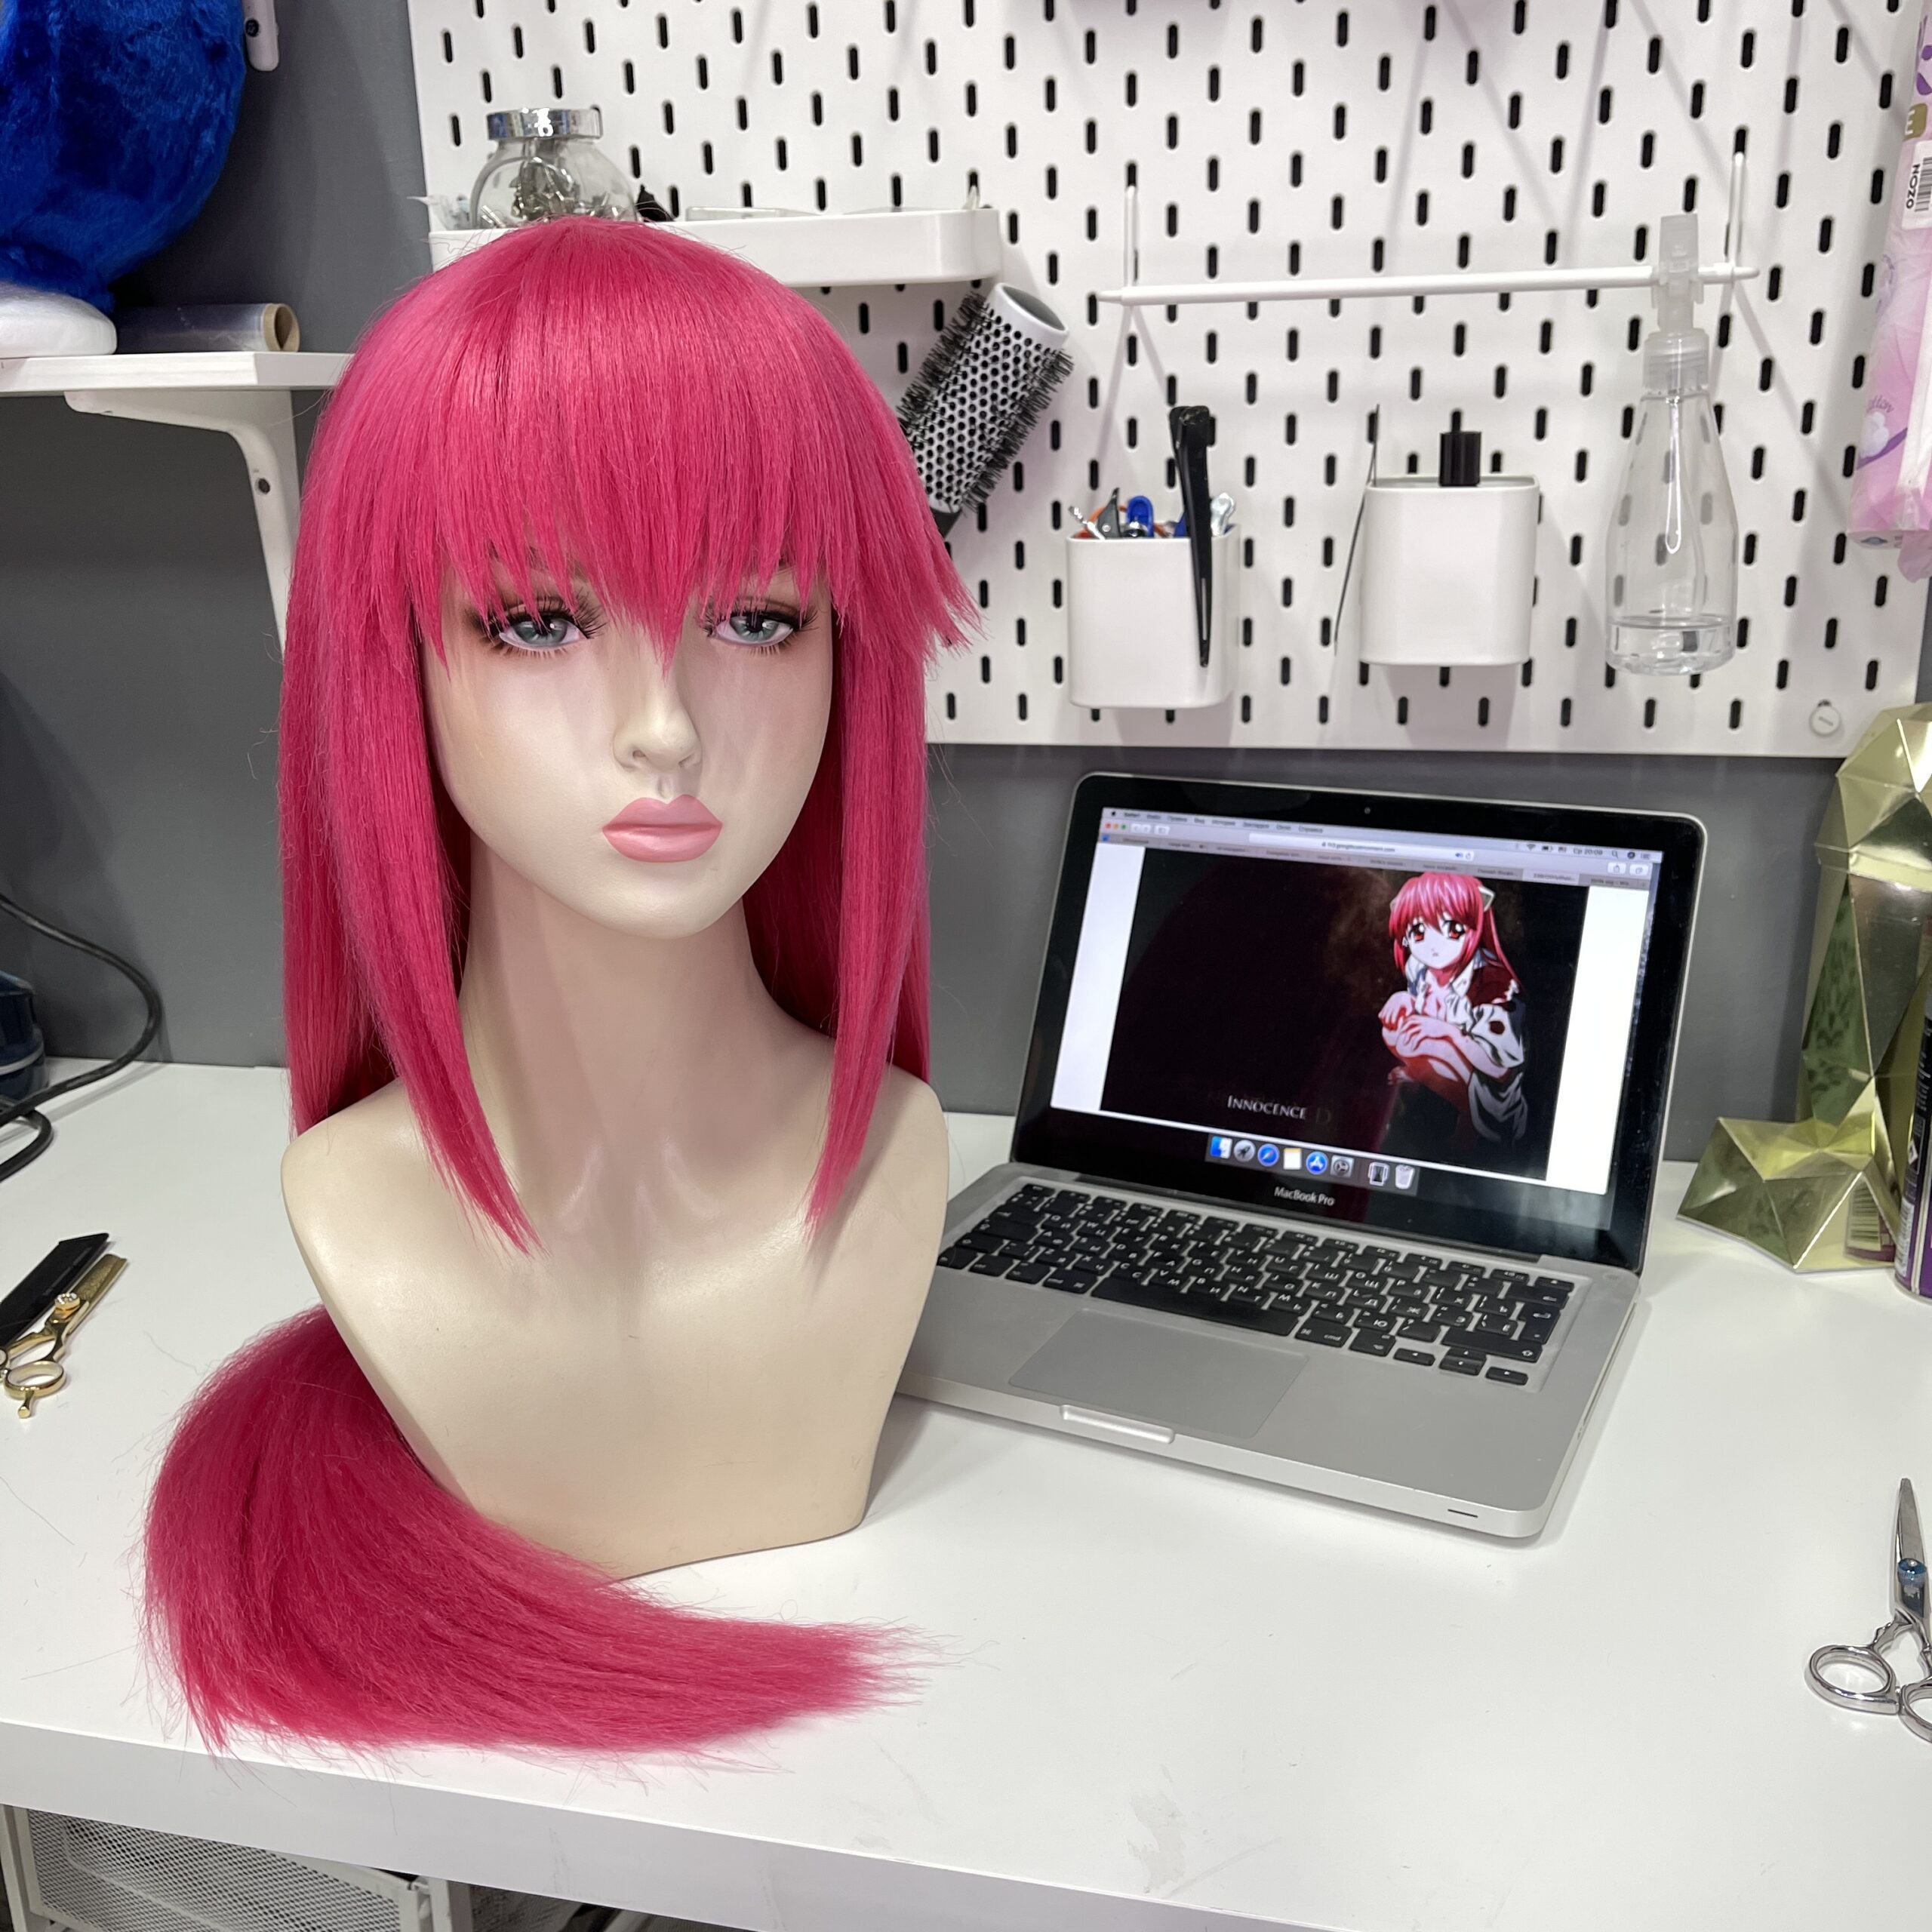 Elfen Lied Lucy Creating and coloring.